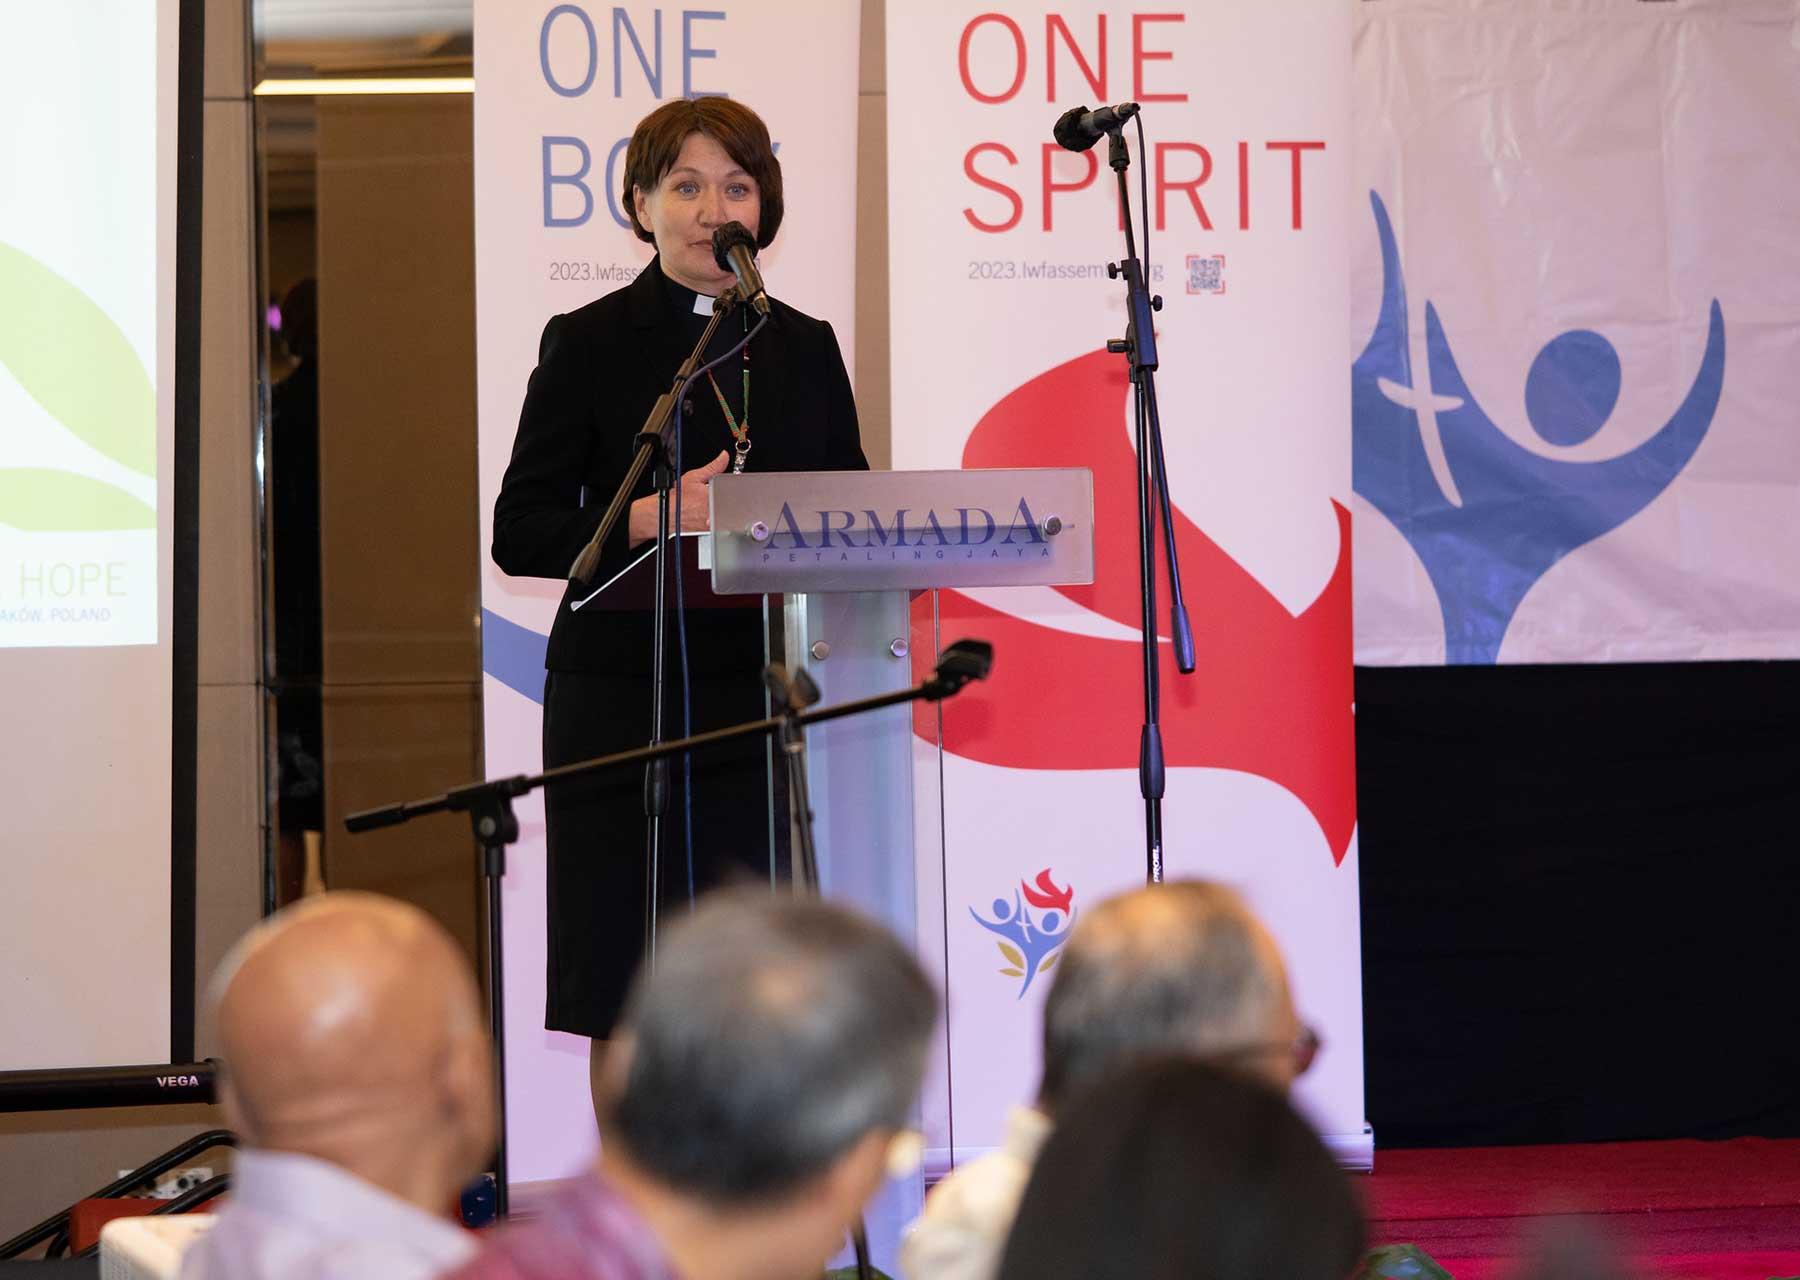 The General Secretary of the LWF, Rev. Dr. Anne Burghardt, presenting the Assembly theme during the Asia Pre-Assembly. Photo: LWF/Jotham Lee